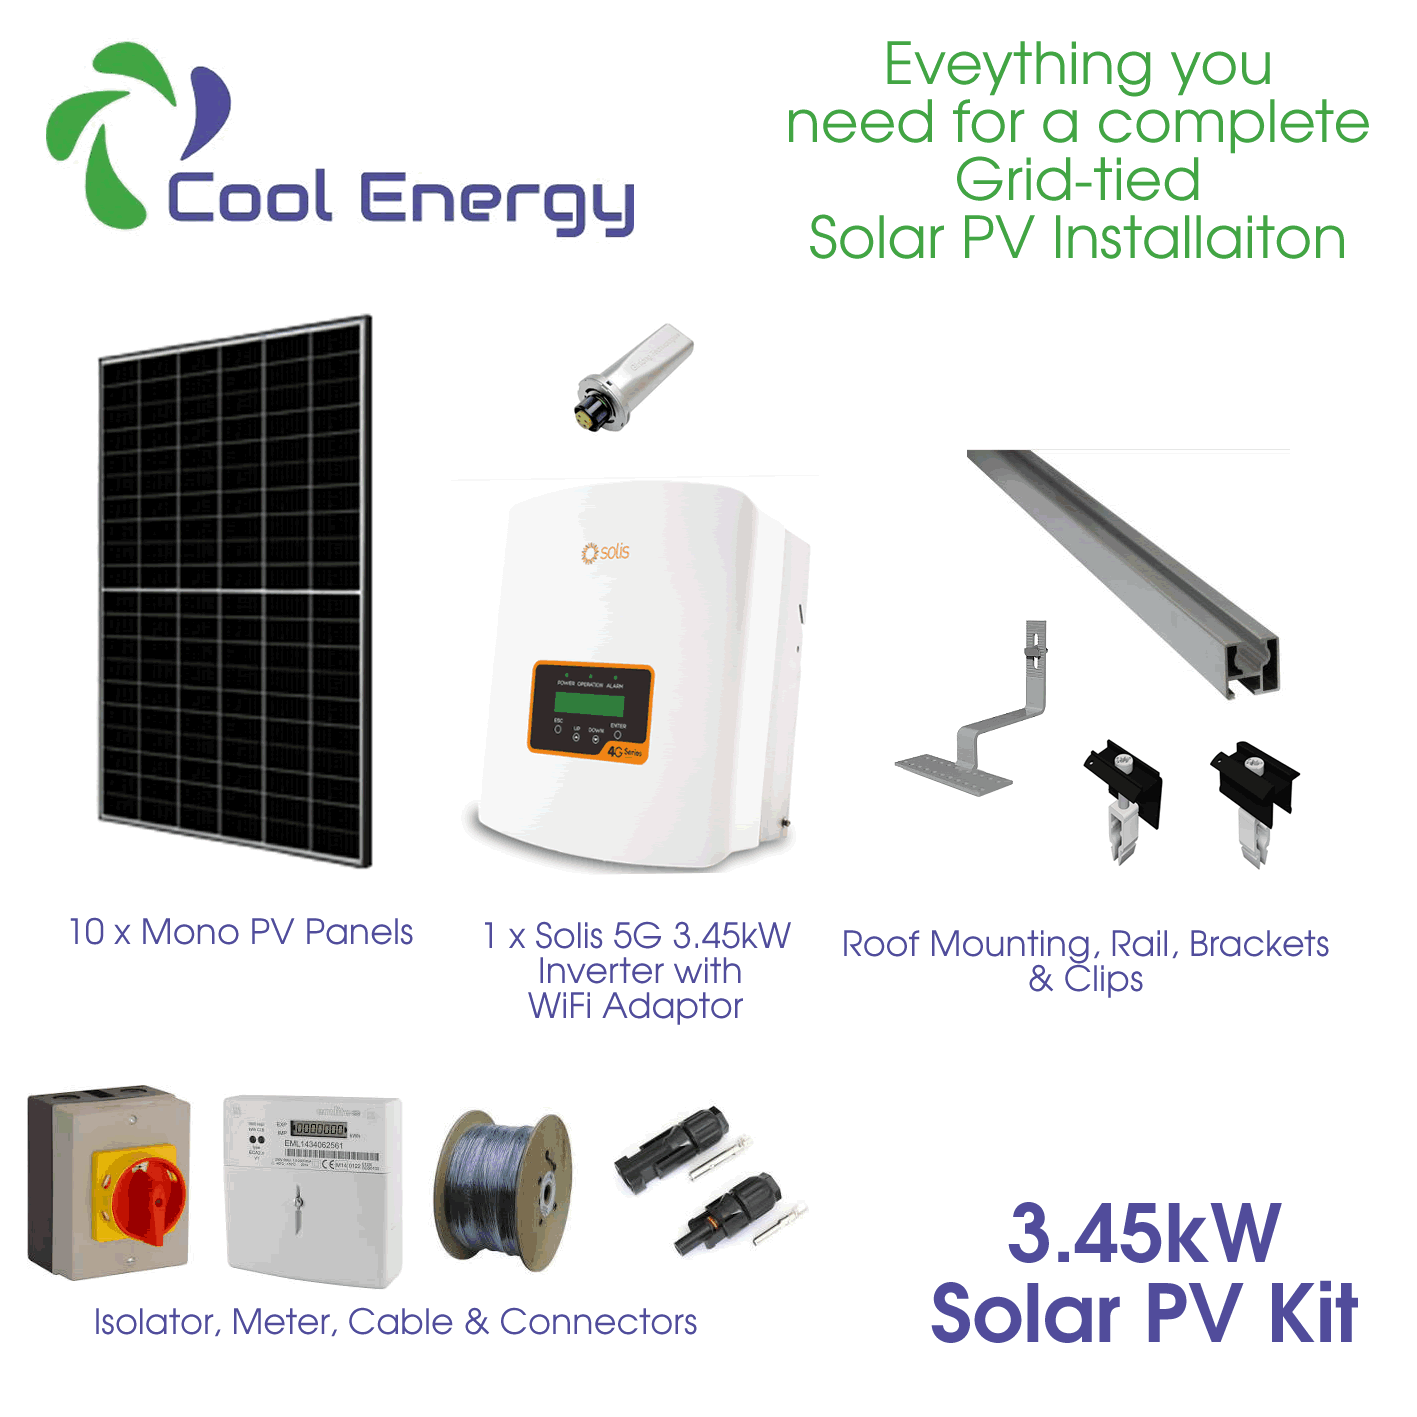 Cool Energy 3.45kW Solar PV Kit CE-PVKIT2 - Solar PV - Cool Energy Shop